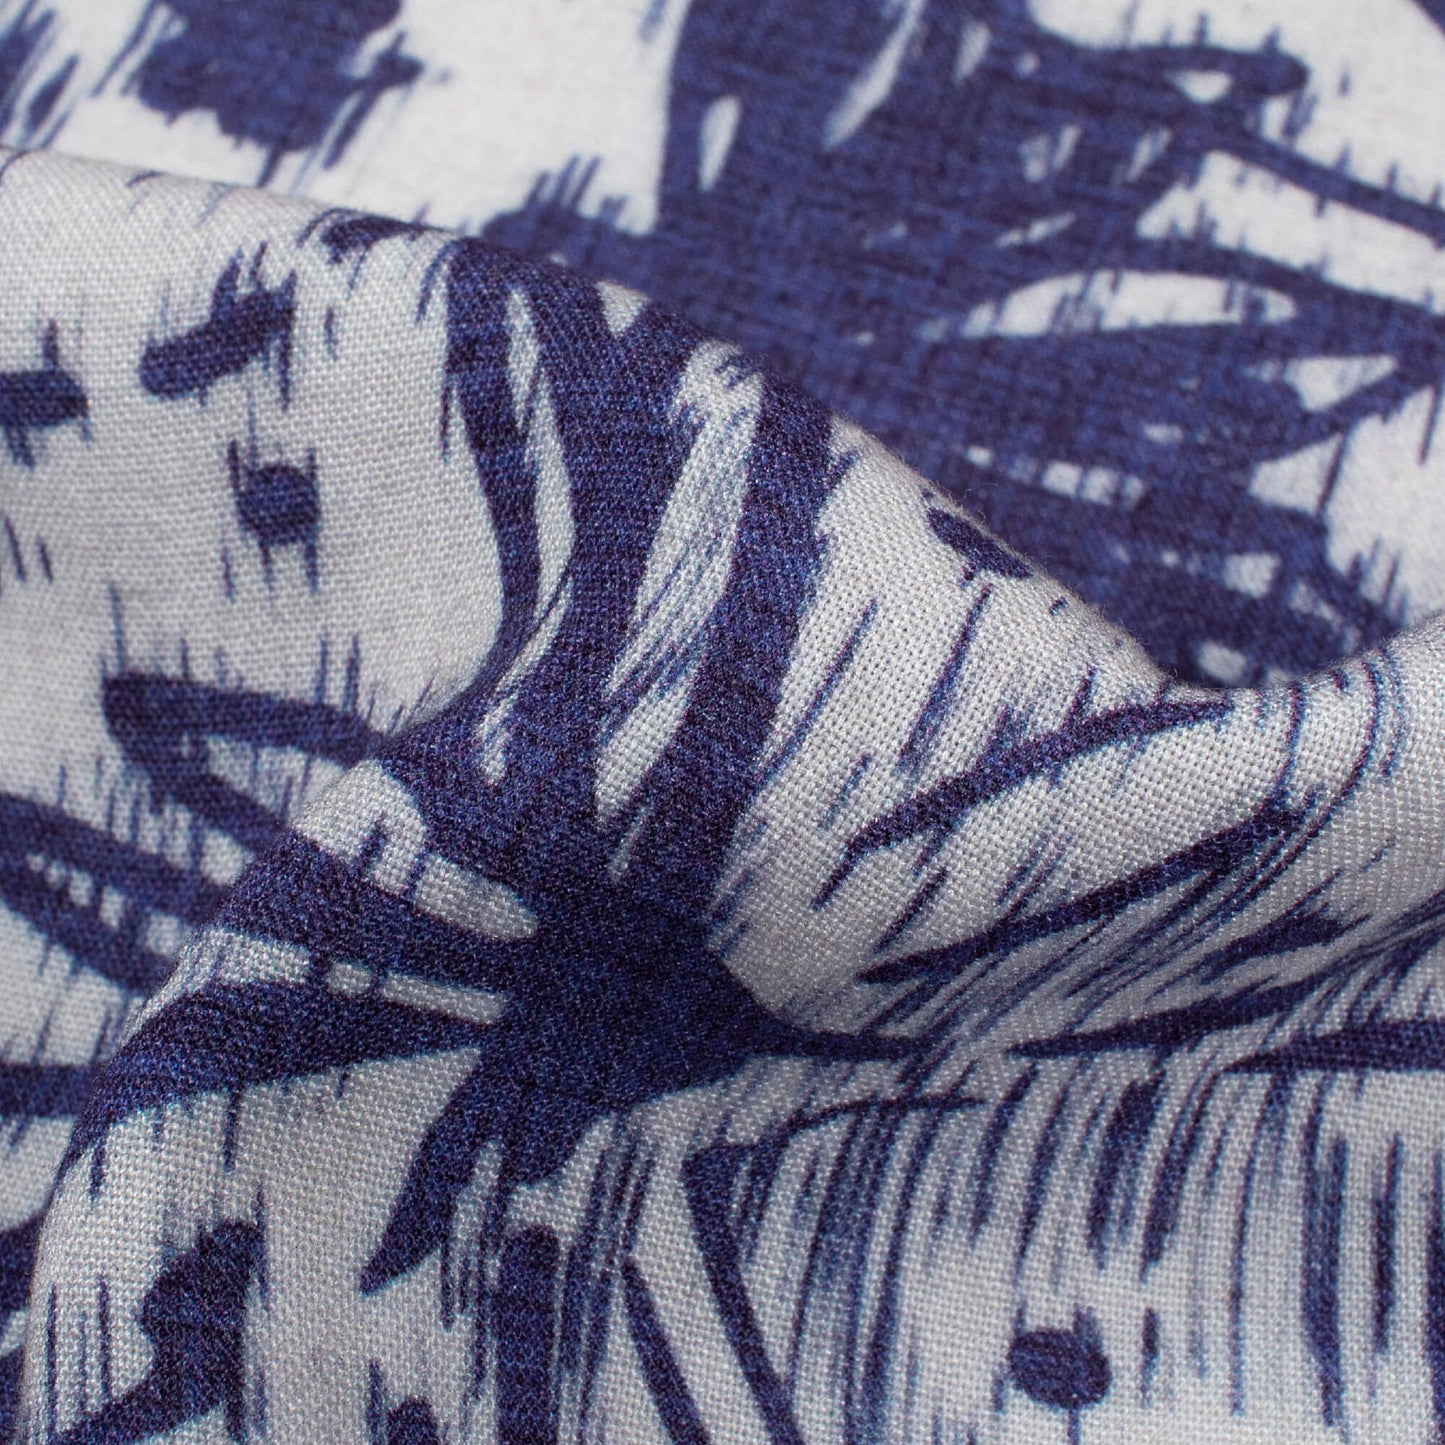 Navy Blue And White Floral Pattern Digital Print Viscose Rayon Fabric (Width 58 Inches)